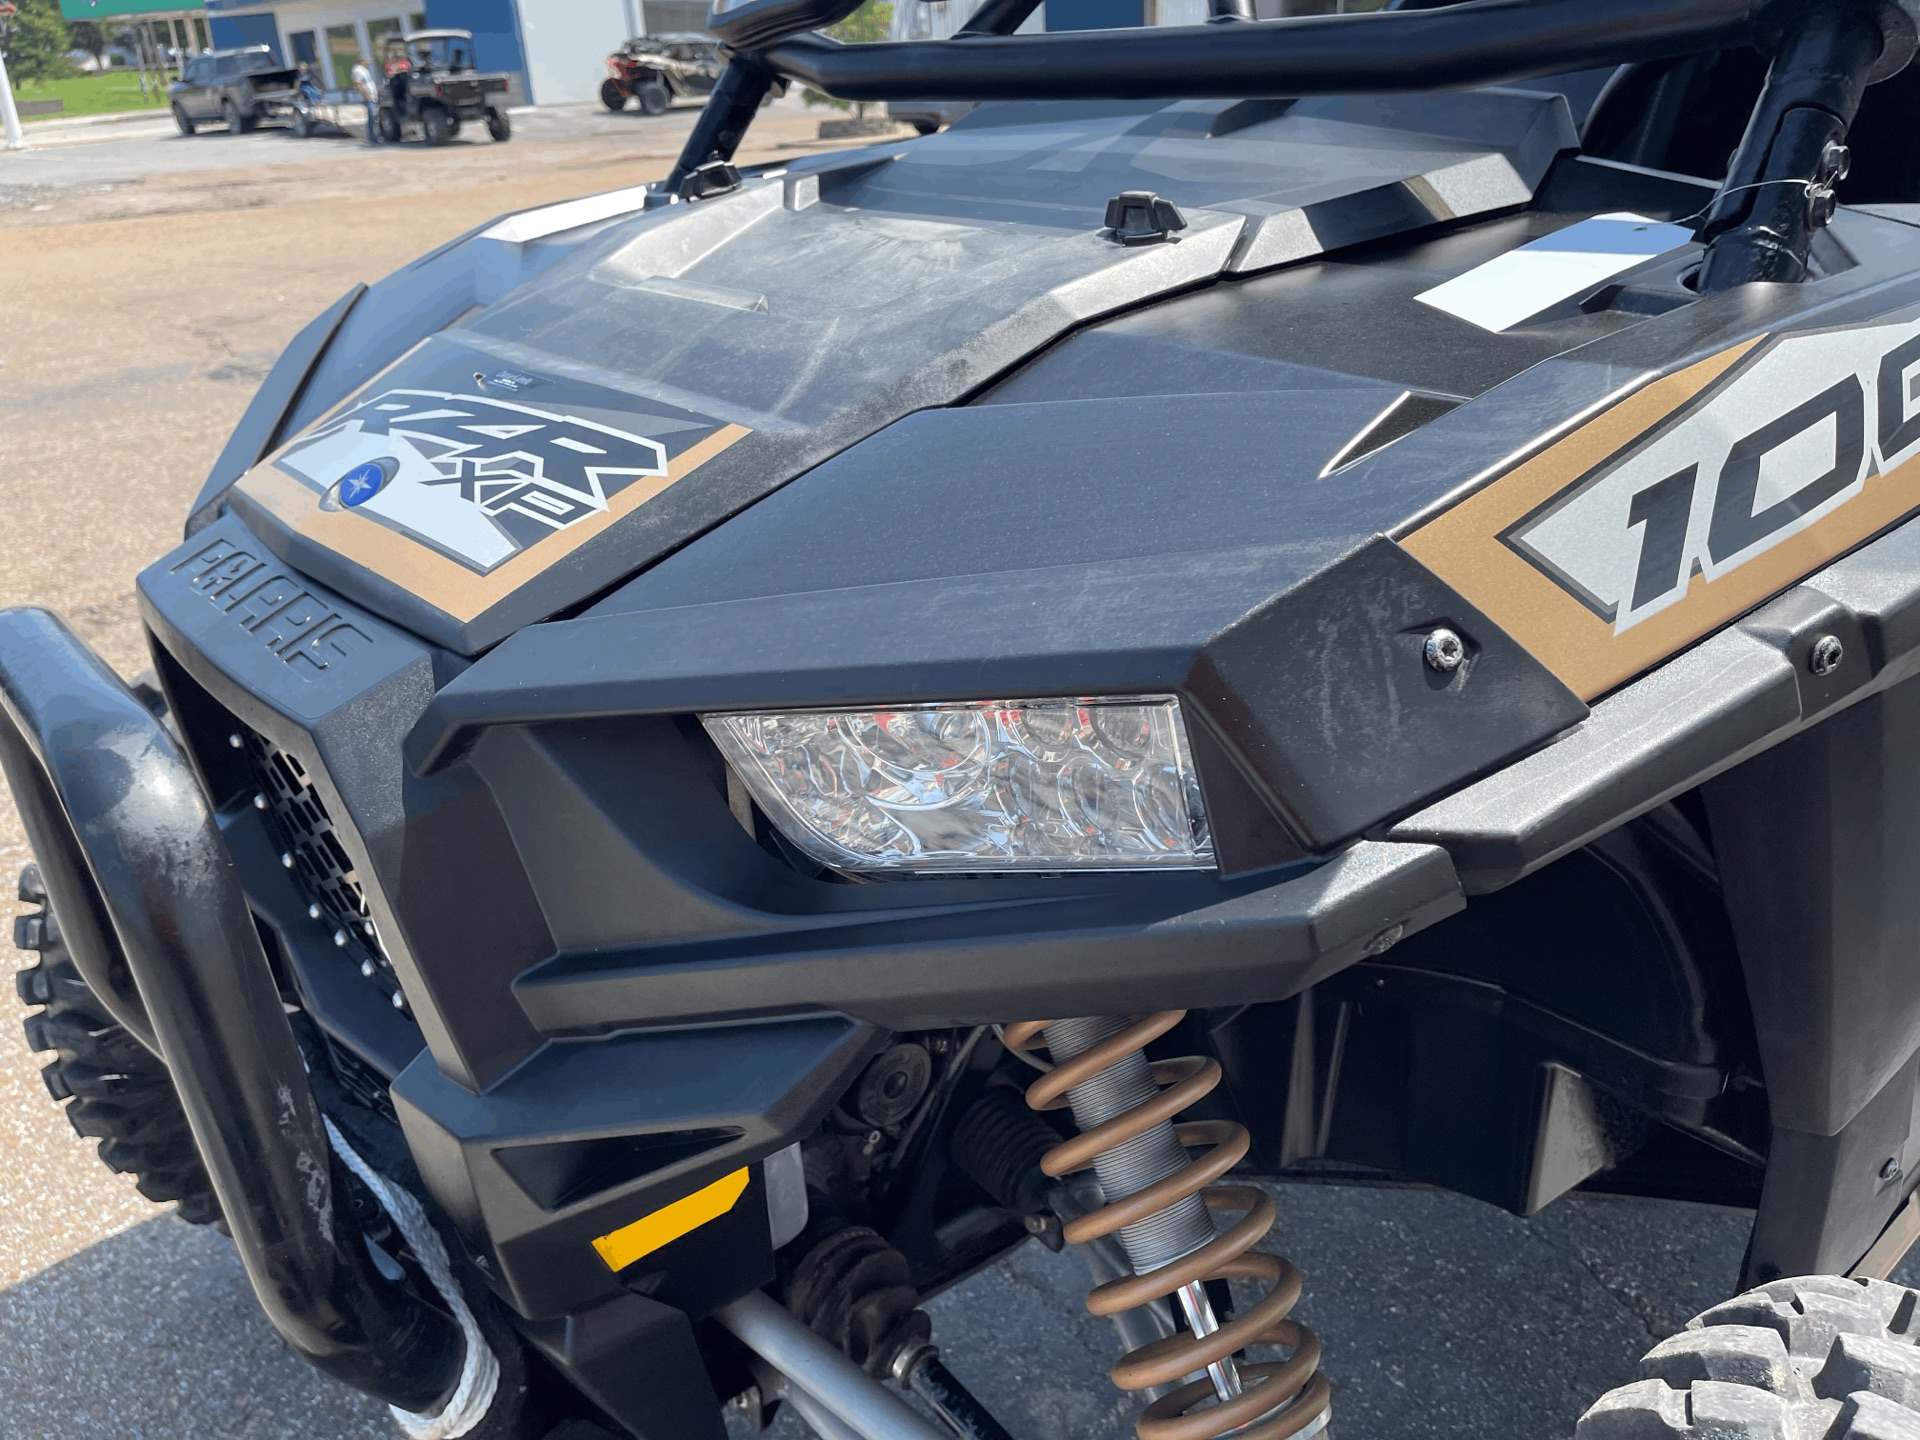 2018 Polaris RZR XP 1000 EPS Trails and Rocks Edition in Dyersburg, Tennessee - Photo 13